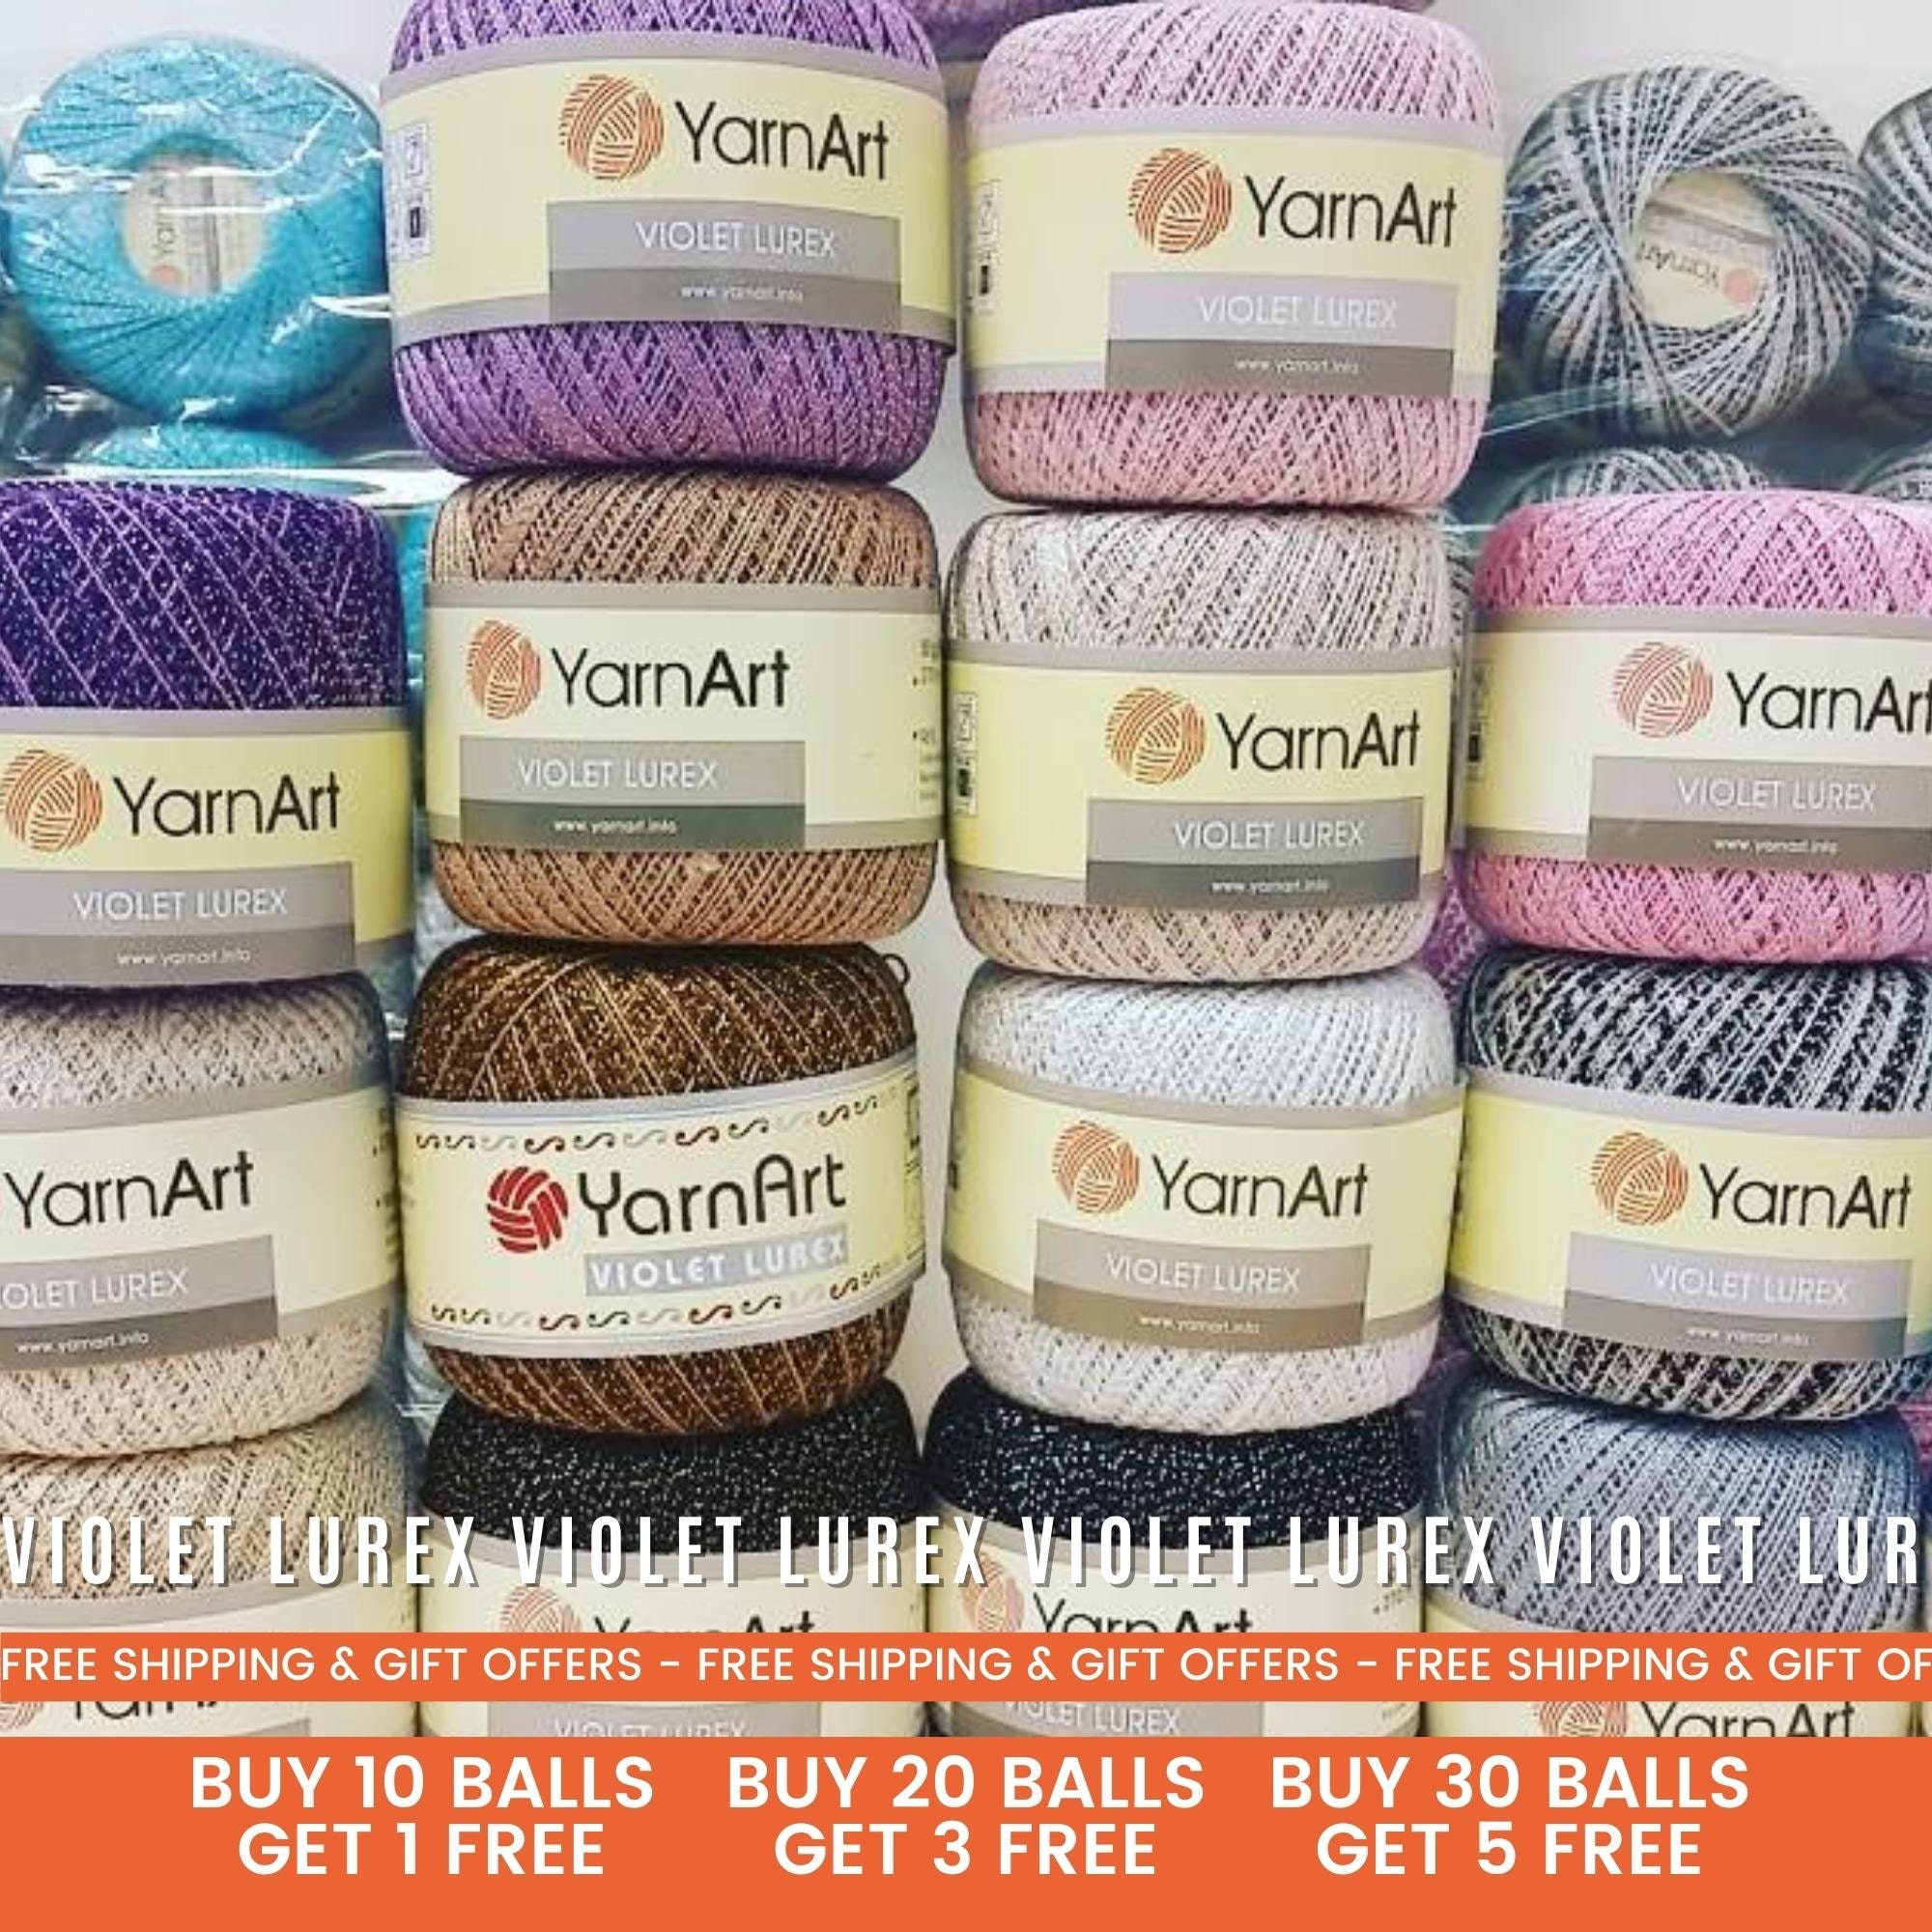 Thick Cotton Yarn for Knitting, Crochet, Crafts, DIY Projects. Nm5